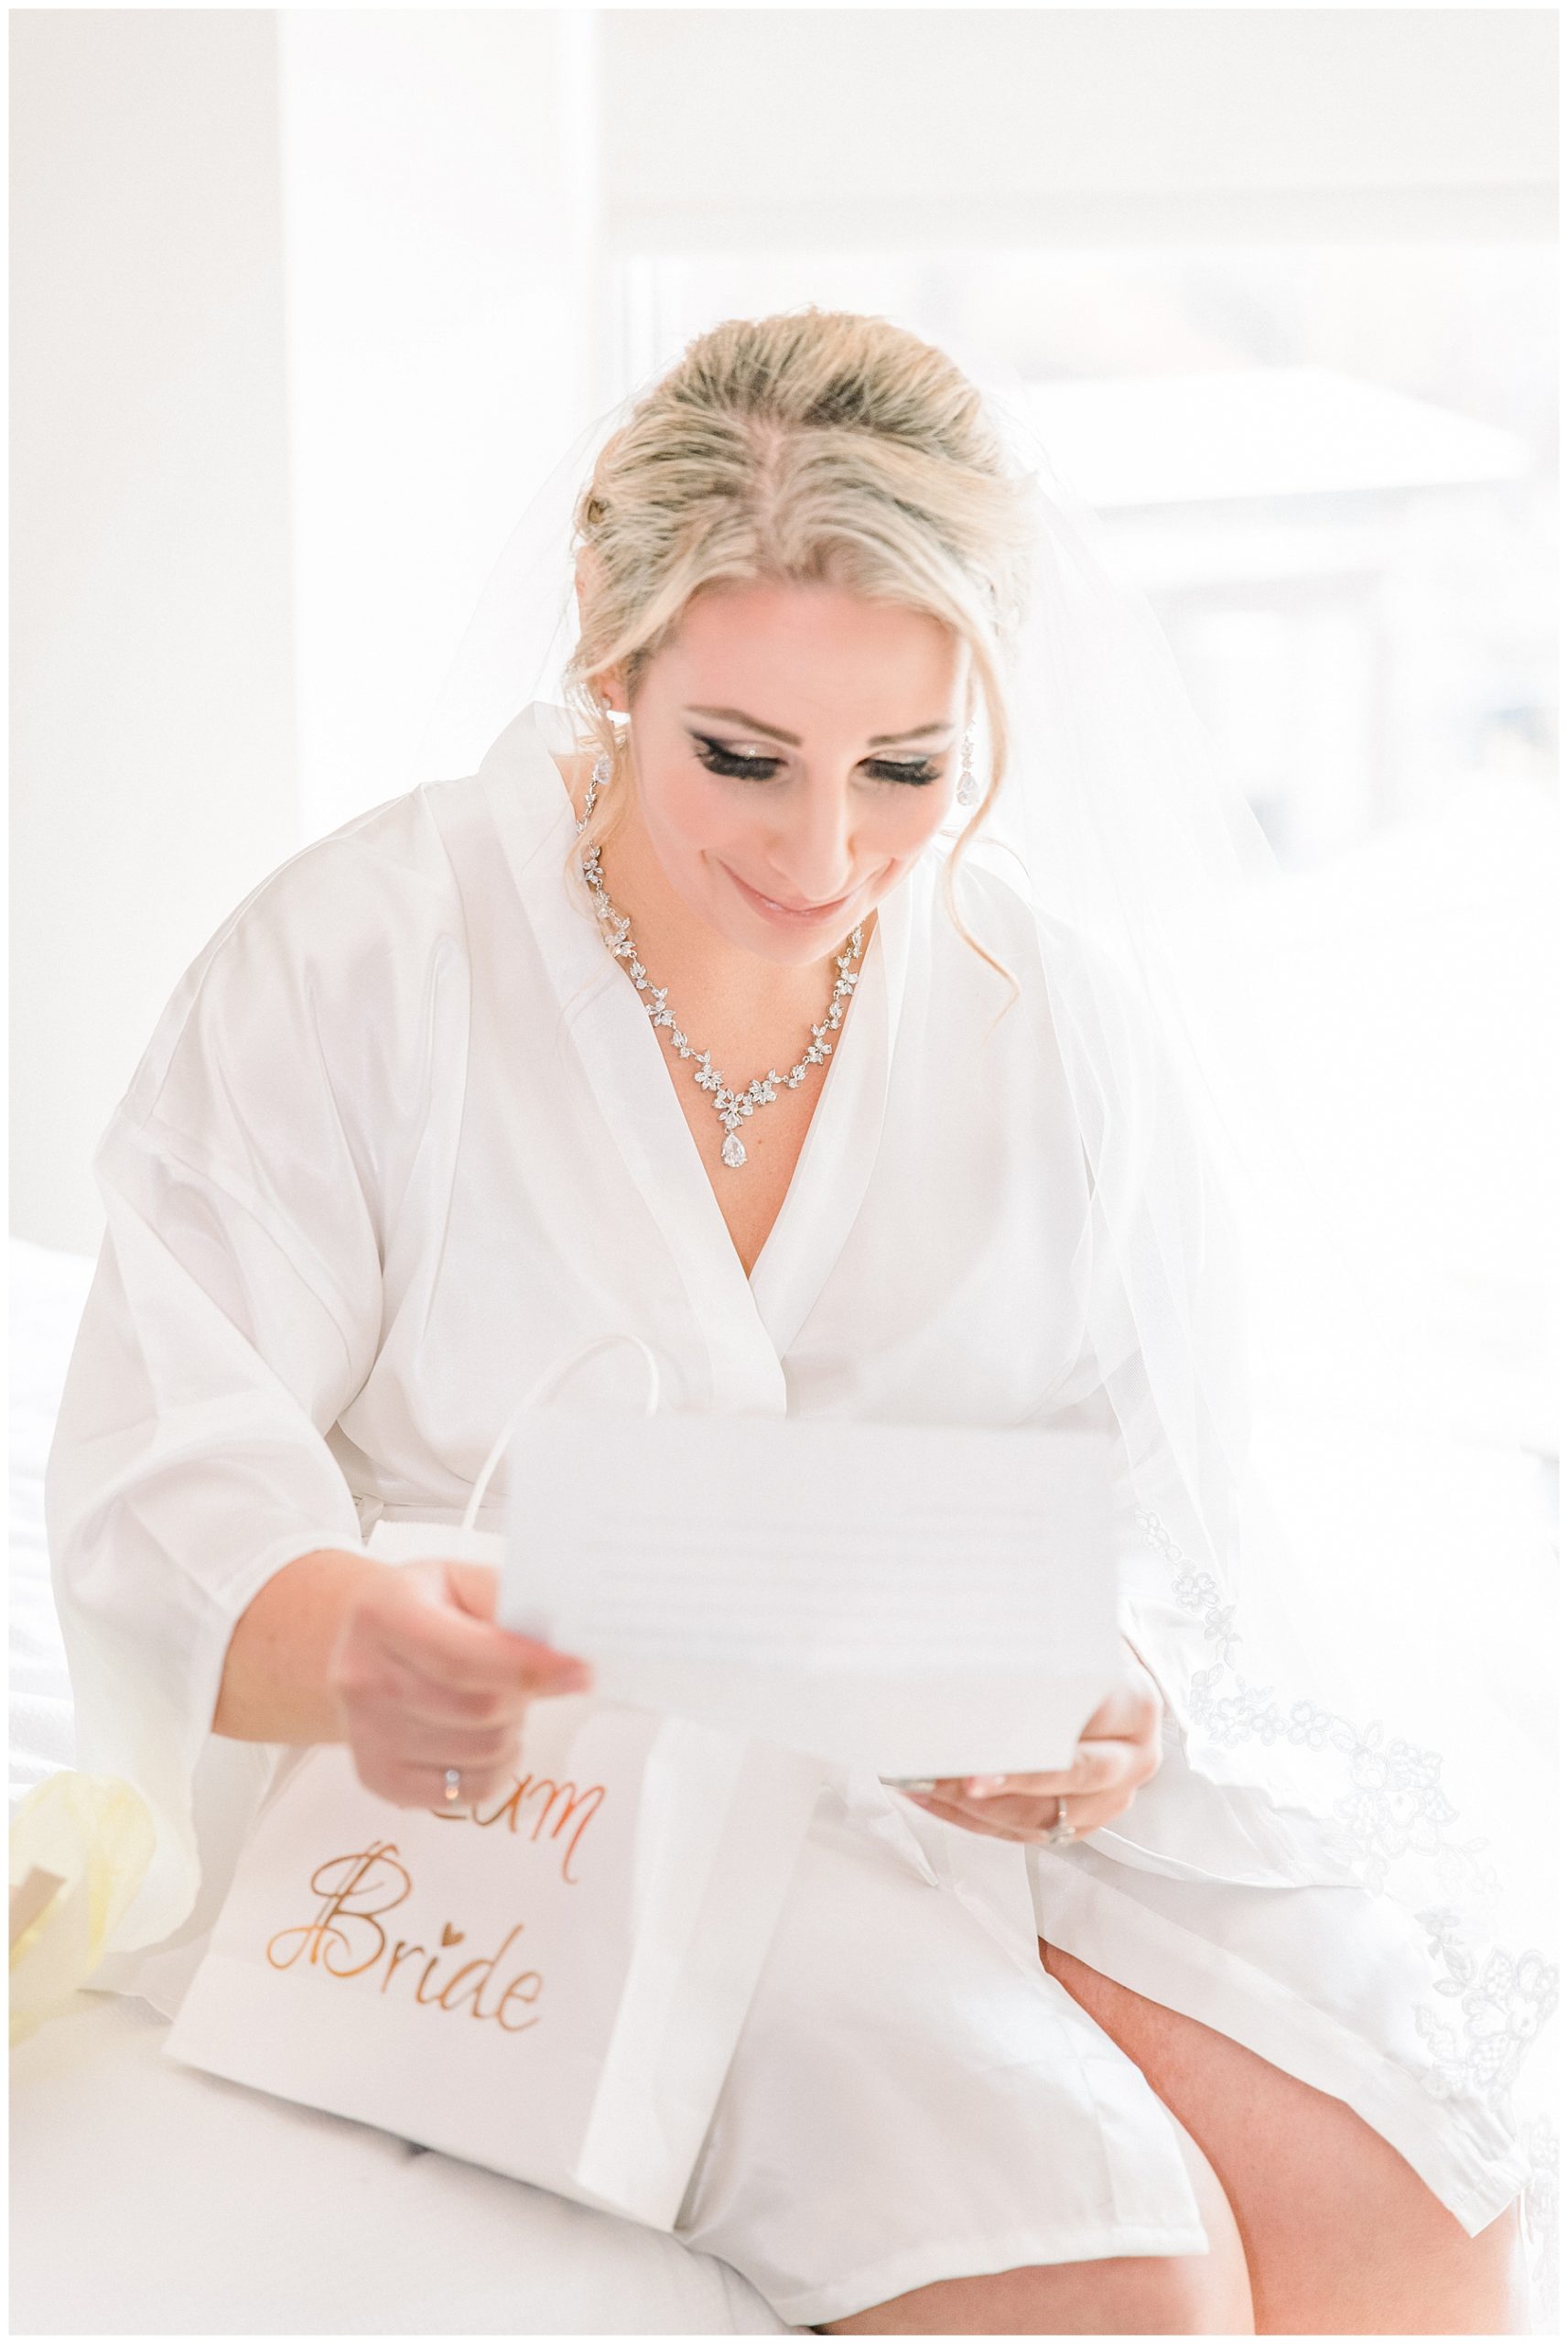 bride reads letter from groom before wedding ceremony